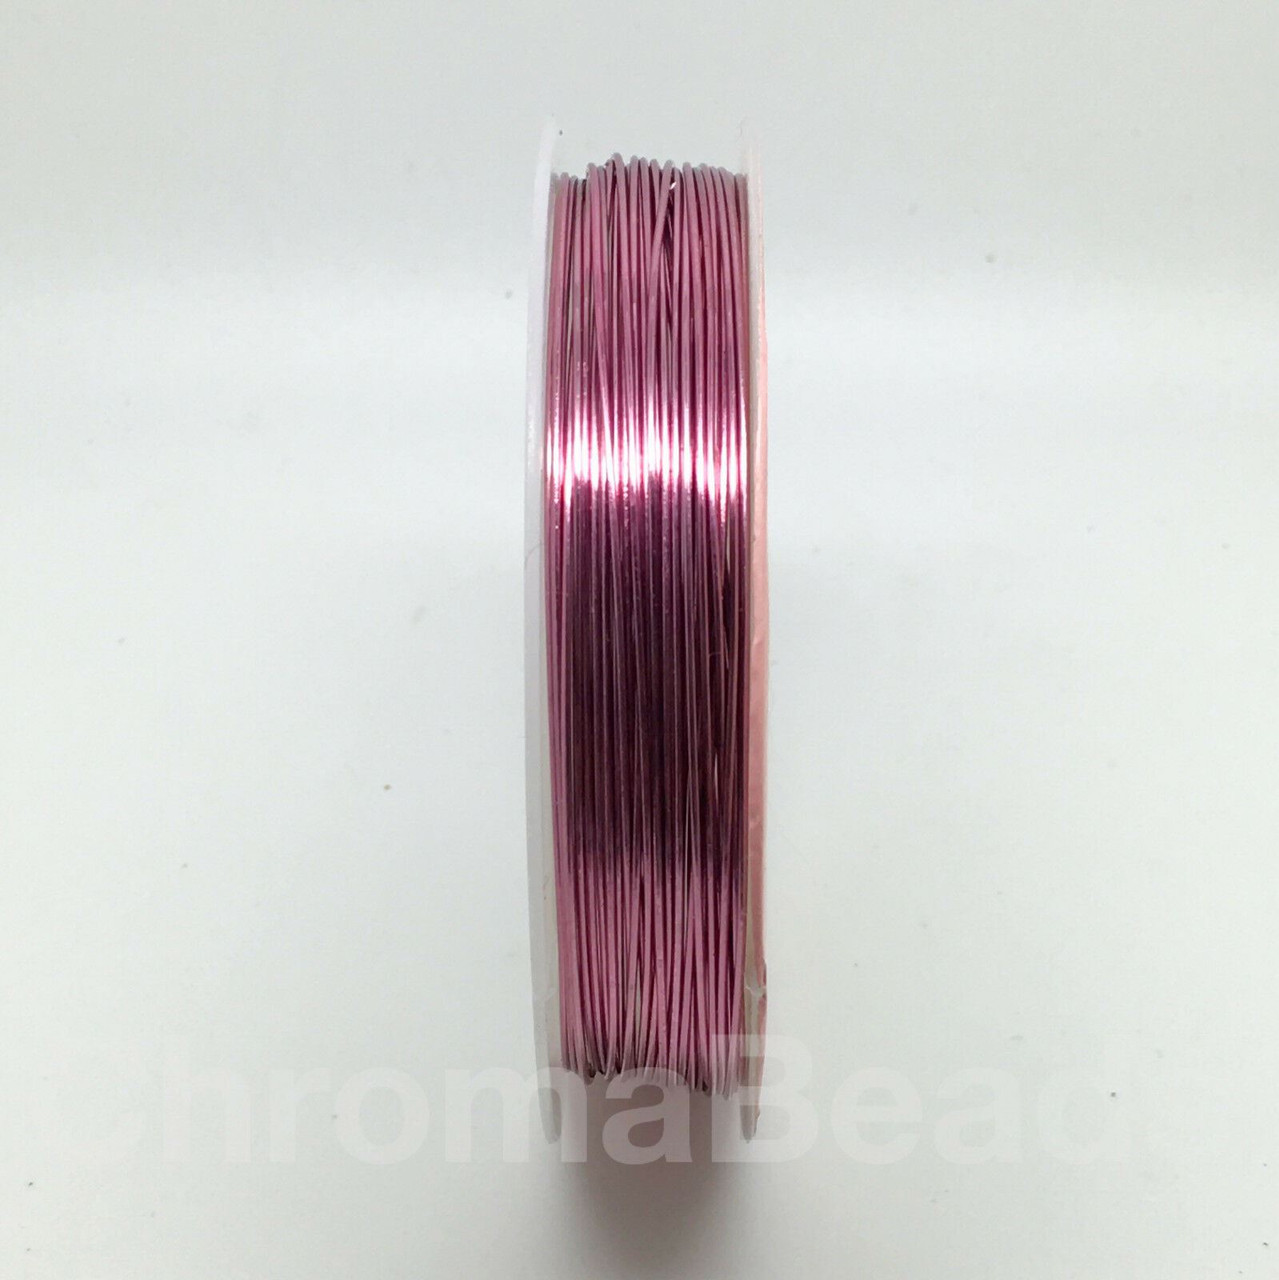 Roll of Copper Wire, 0.4mm thickness, PALE PINK colour, approx 10m length